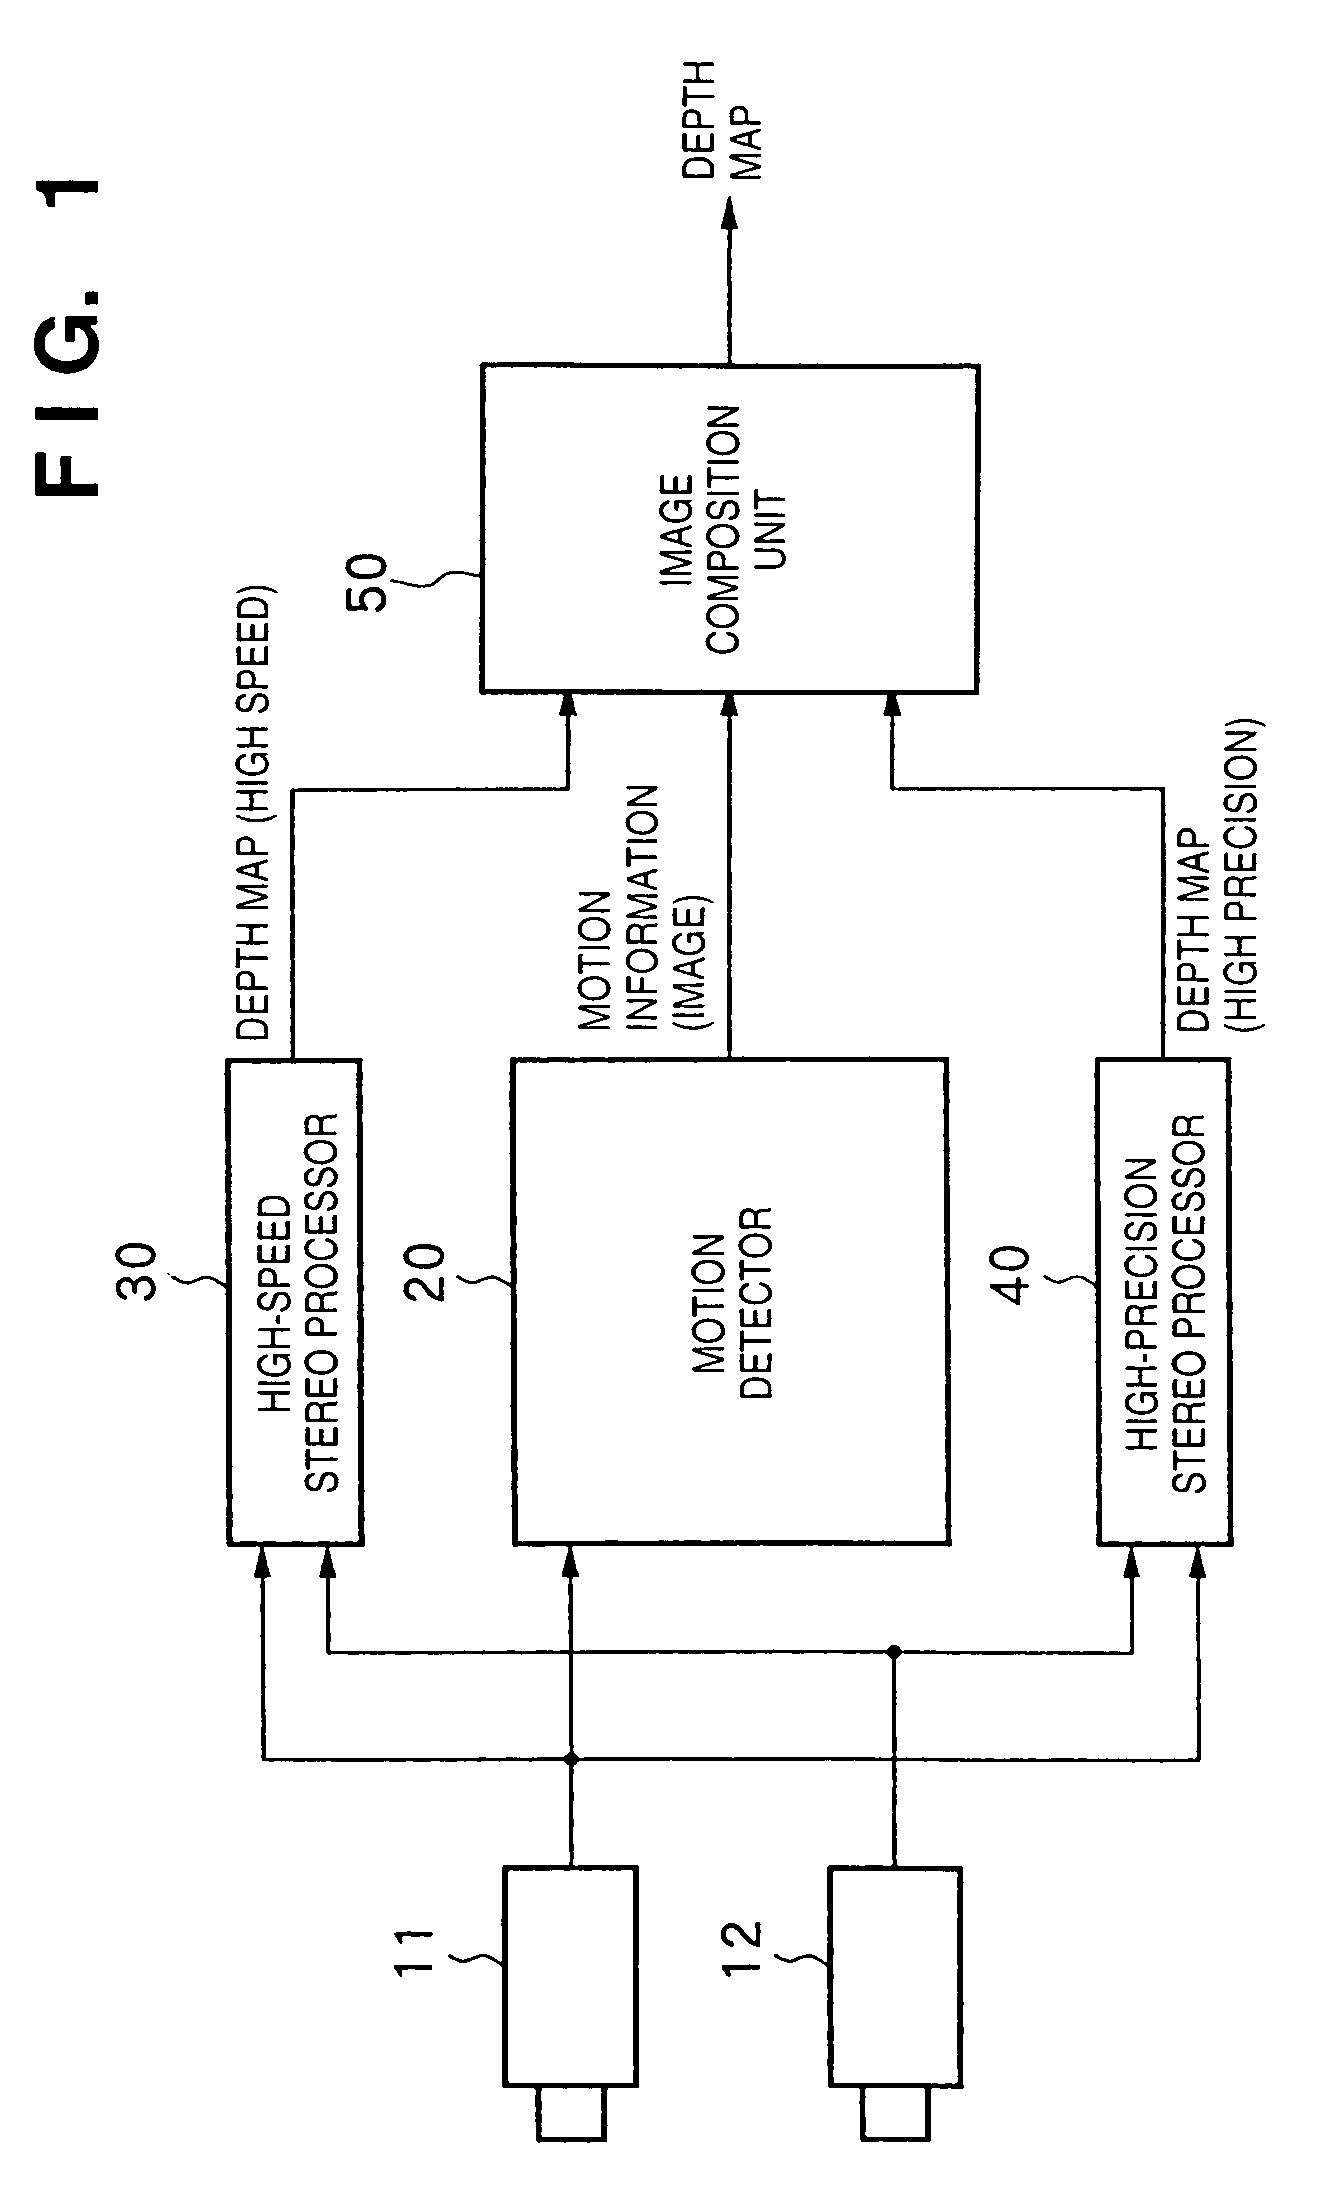 Depth information measurement apparatus and mixed reality presentation system